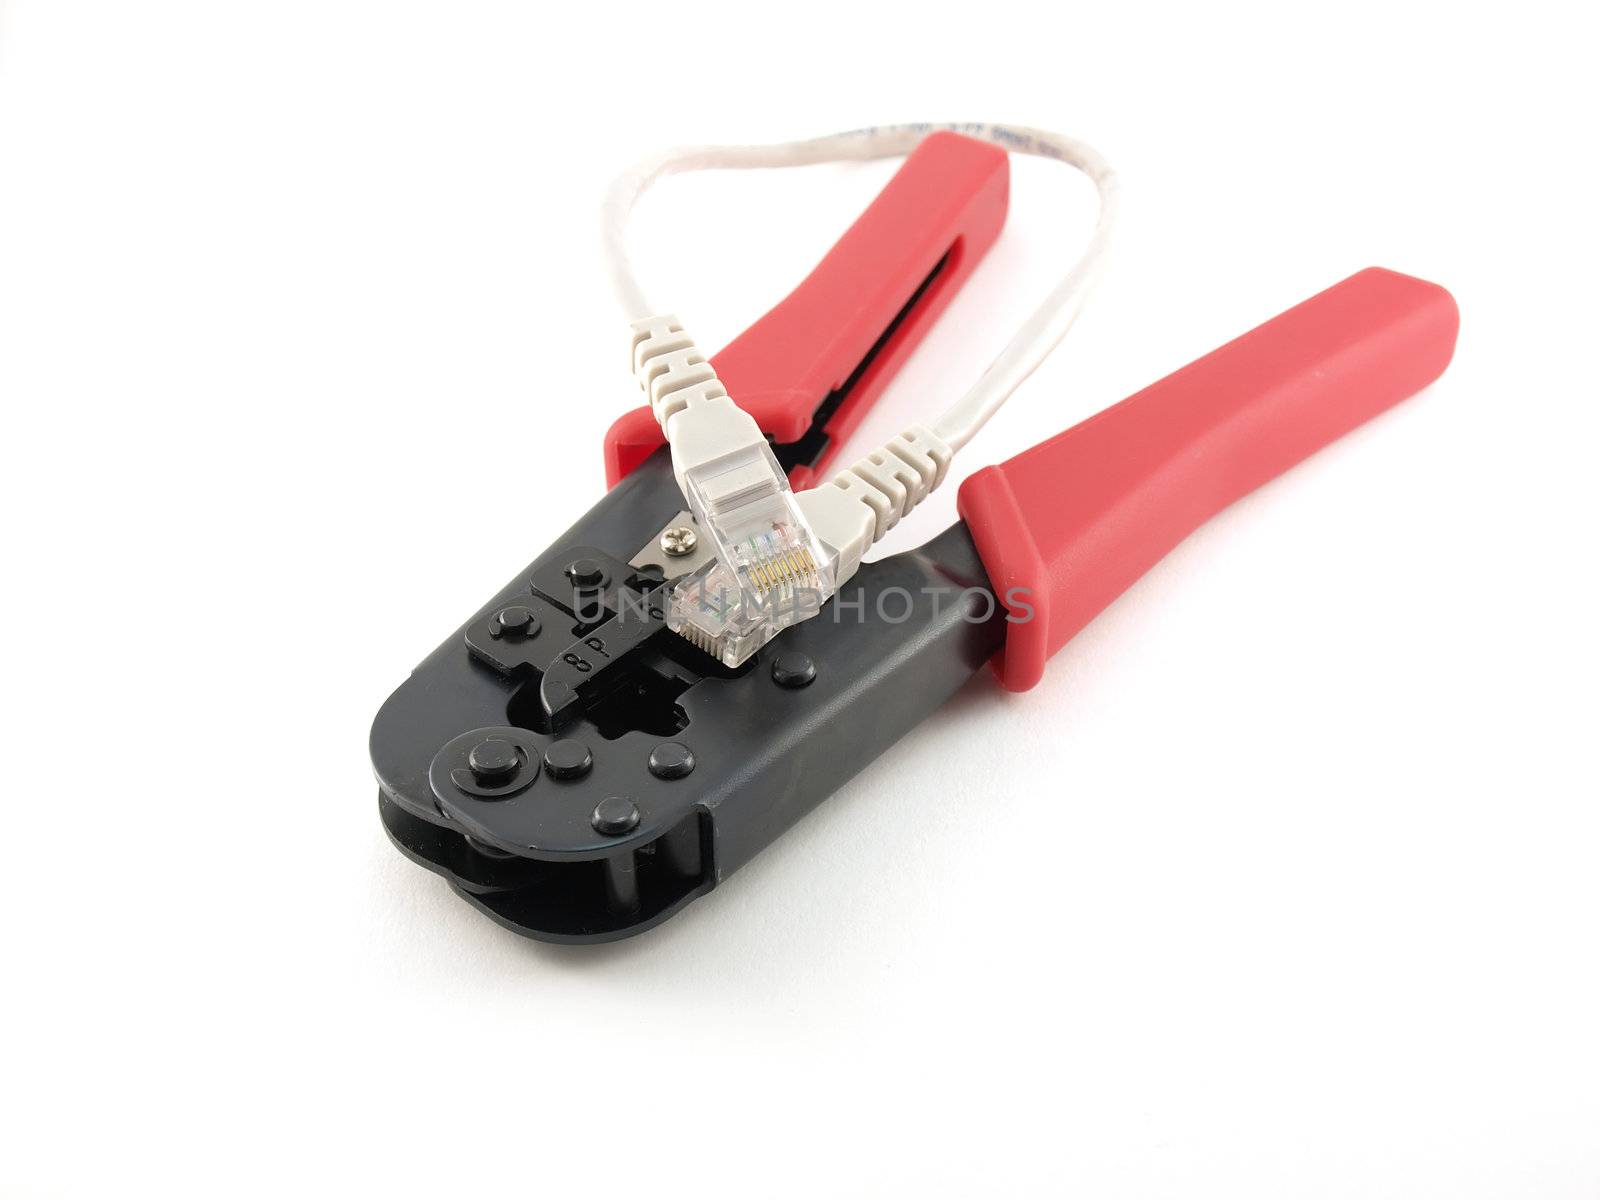 Tool for crimping network cable